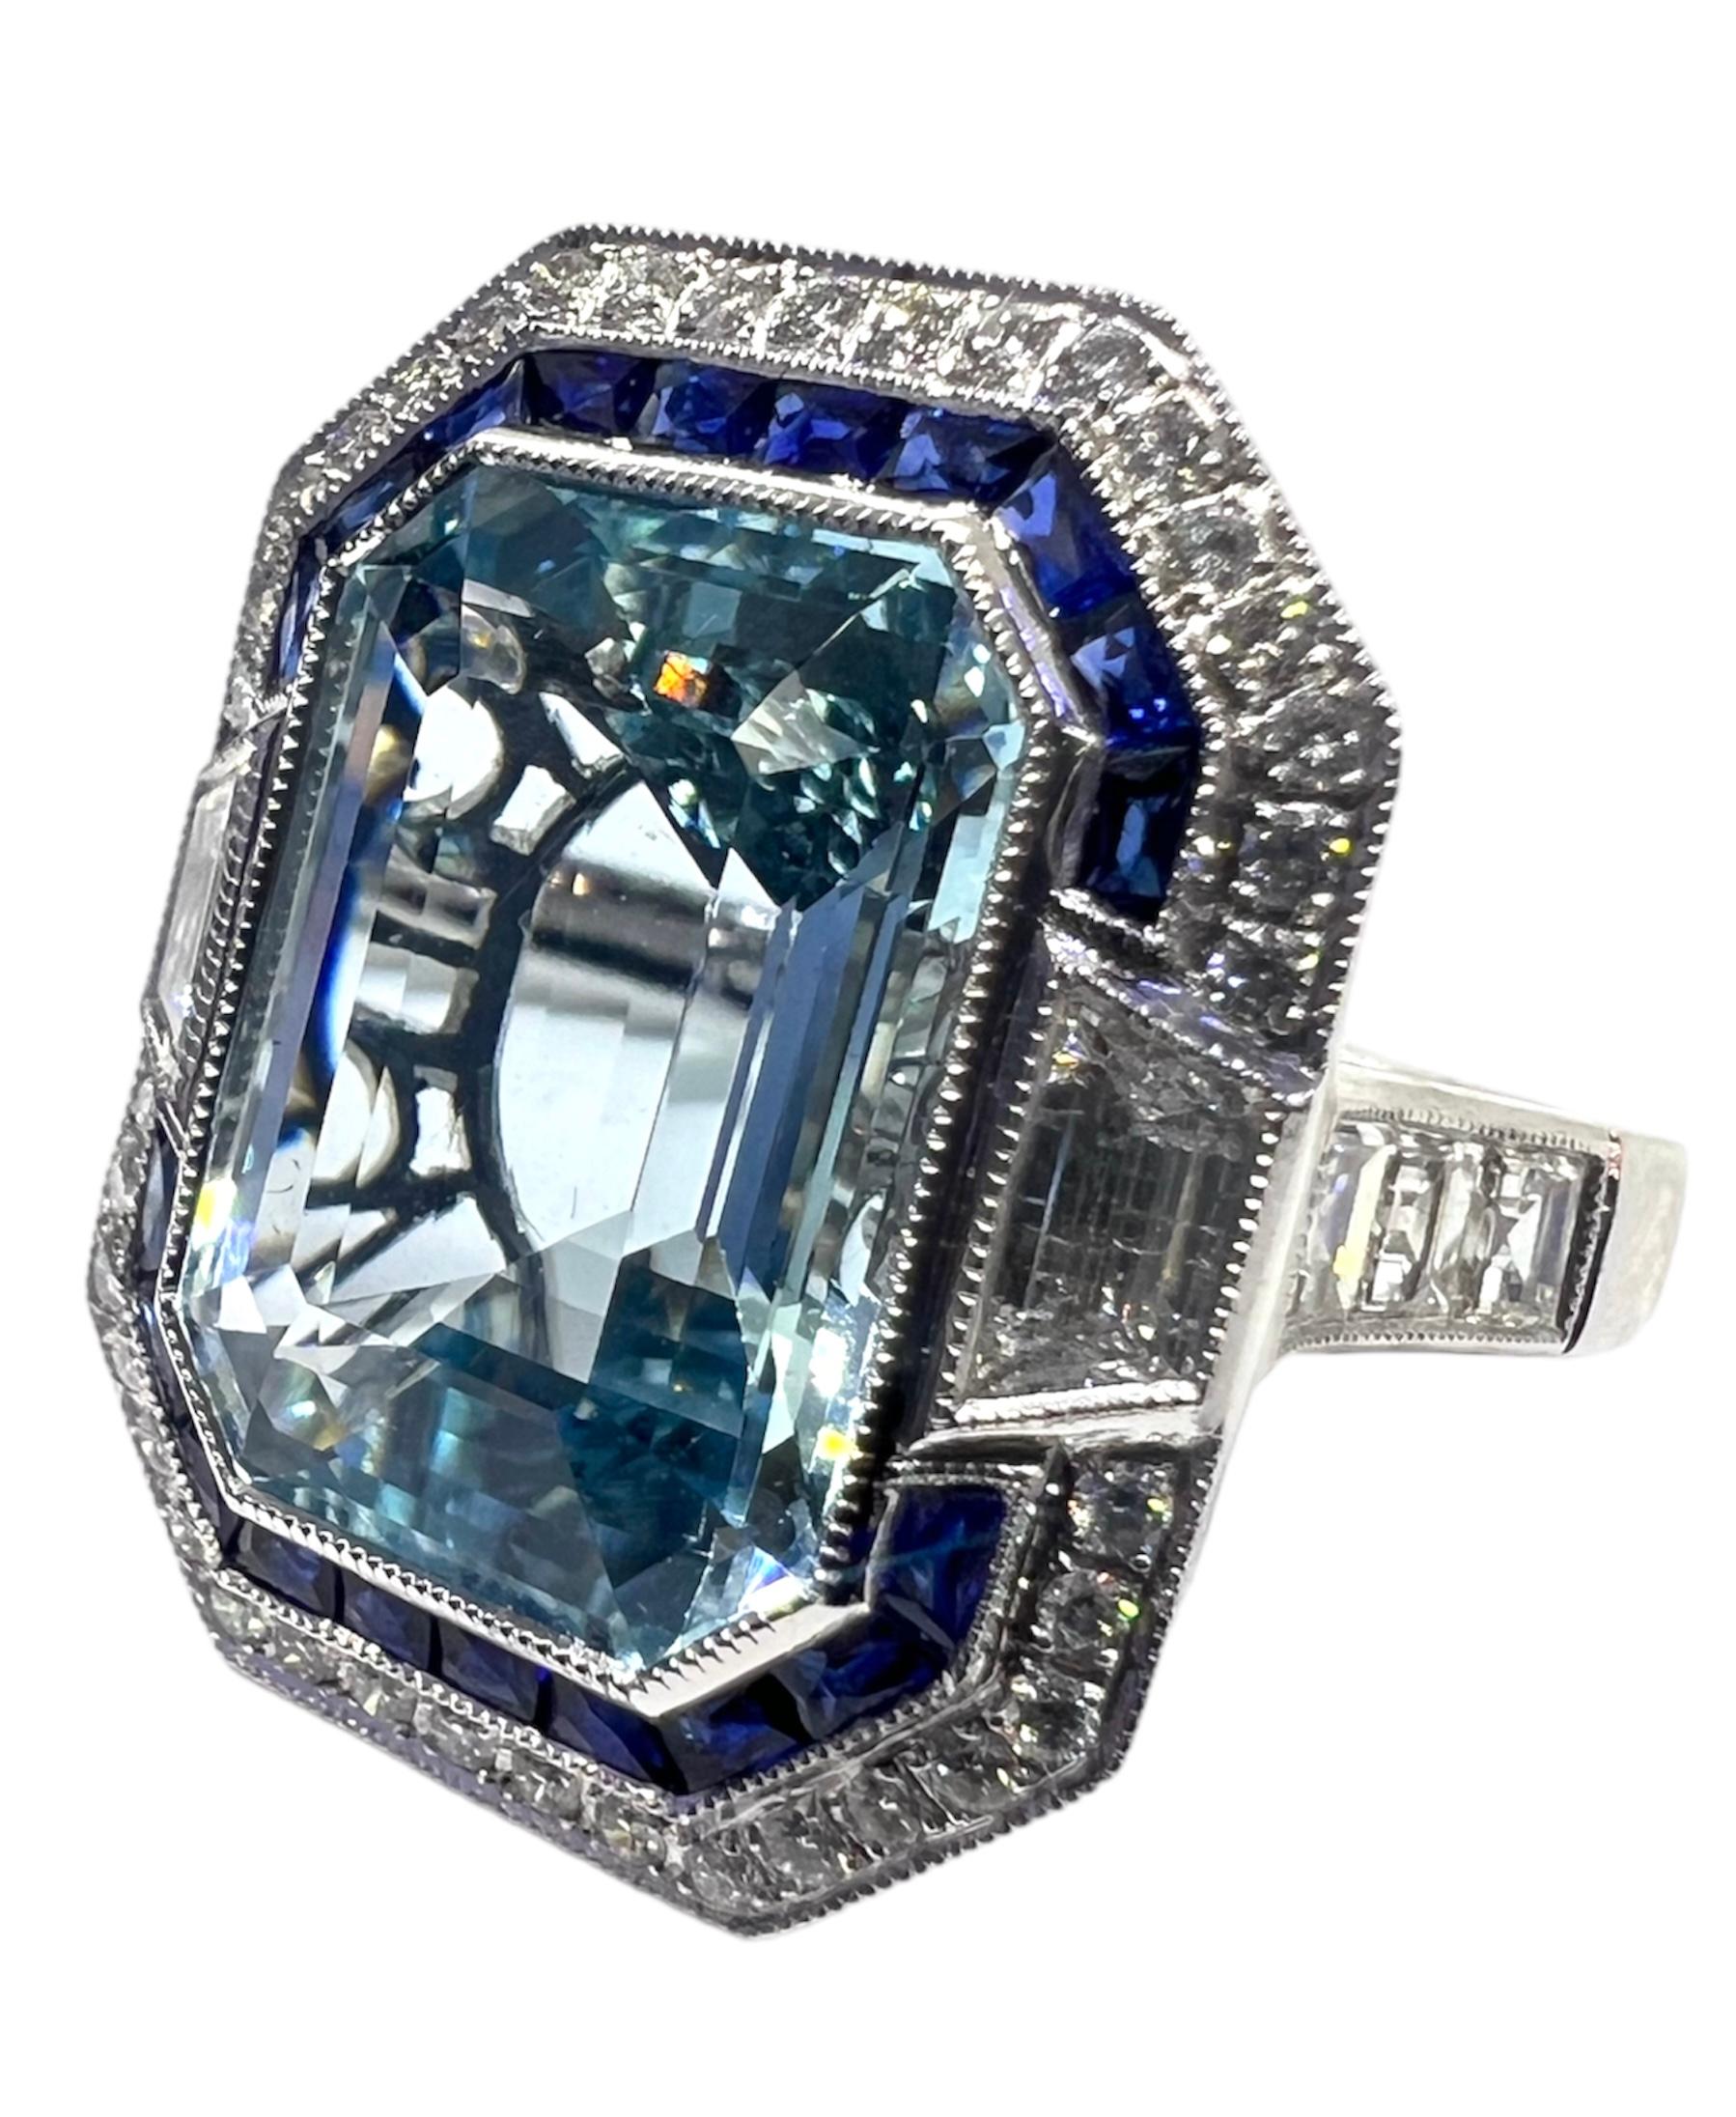 Platinum ring with 8.52 carat aquamarine, 0.60 carat sapphire and 1.04 carat diamond. 

Sophia D by Joseph Dardashti LTD has been known worldwide for 35 years and are inspired by classic Art Deco design that merges with modern manufacturing